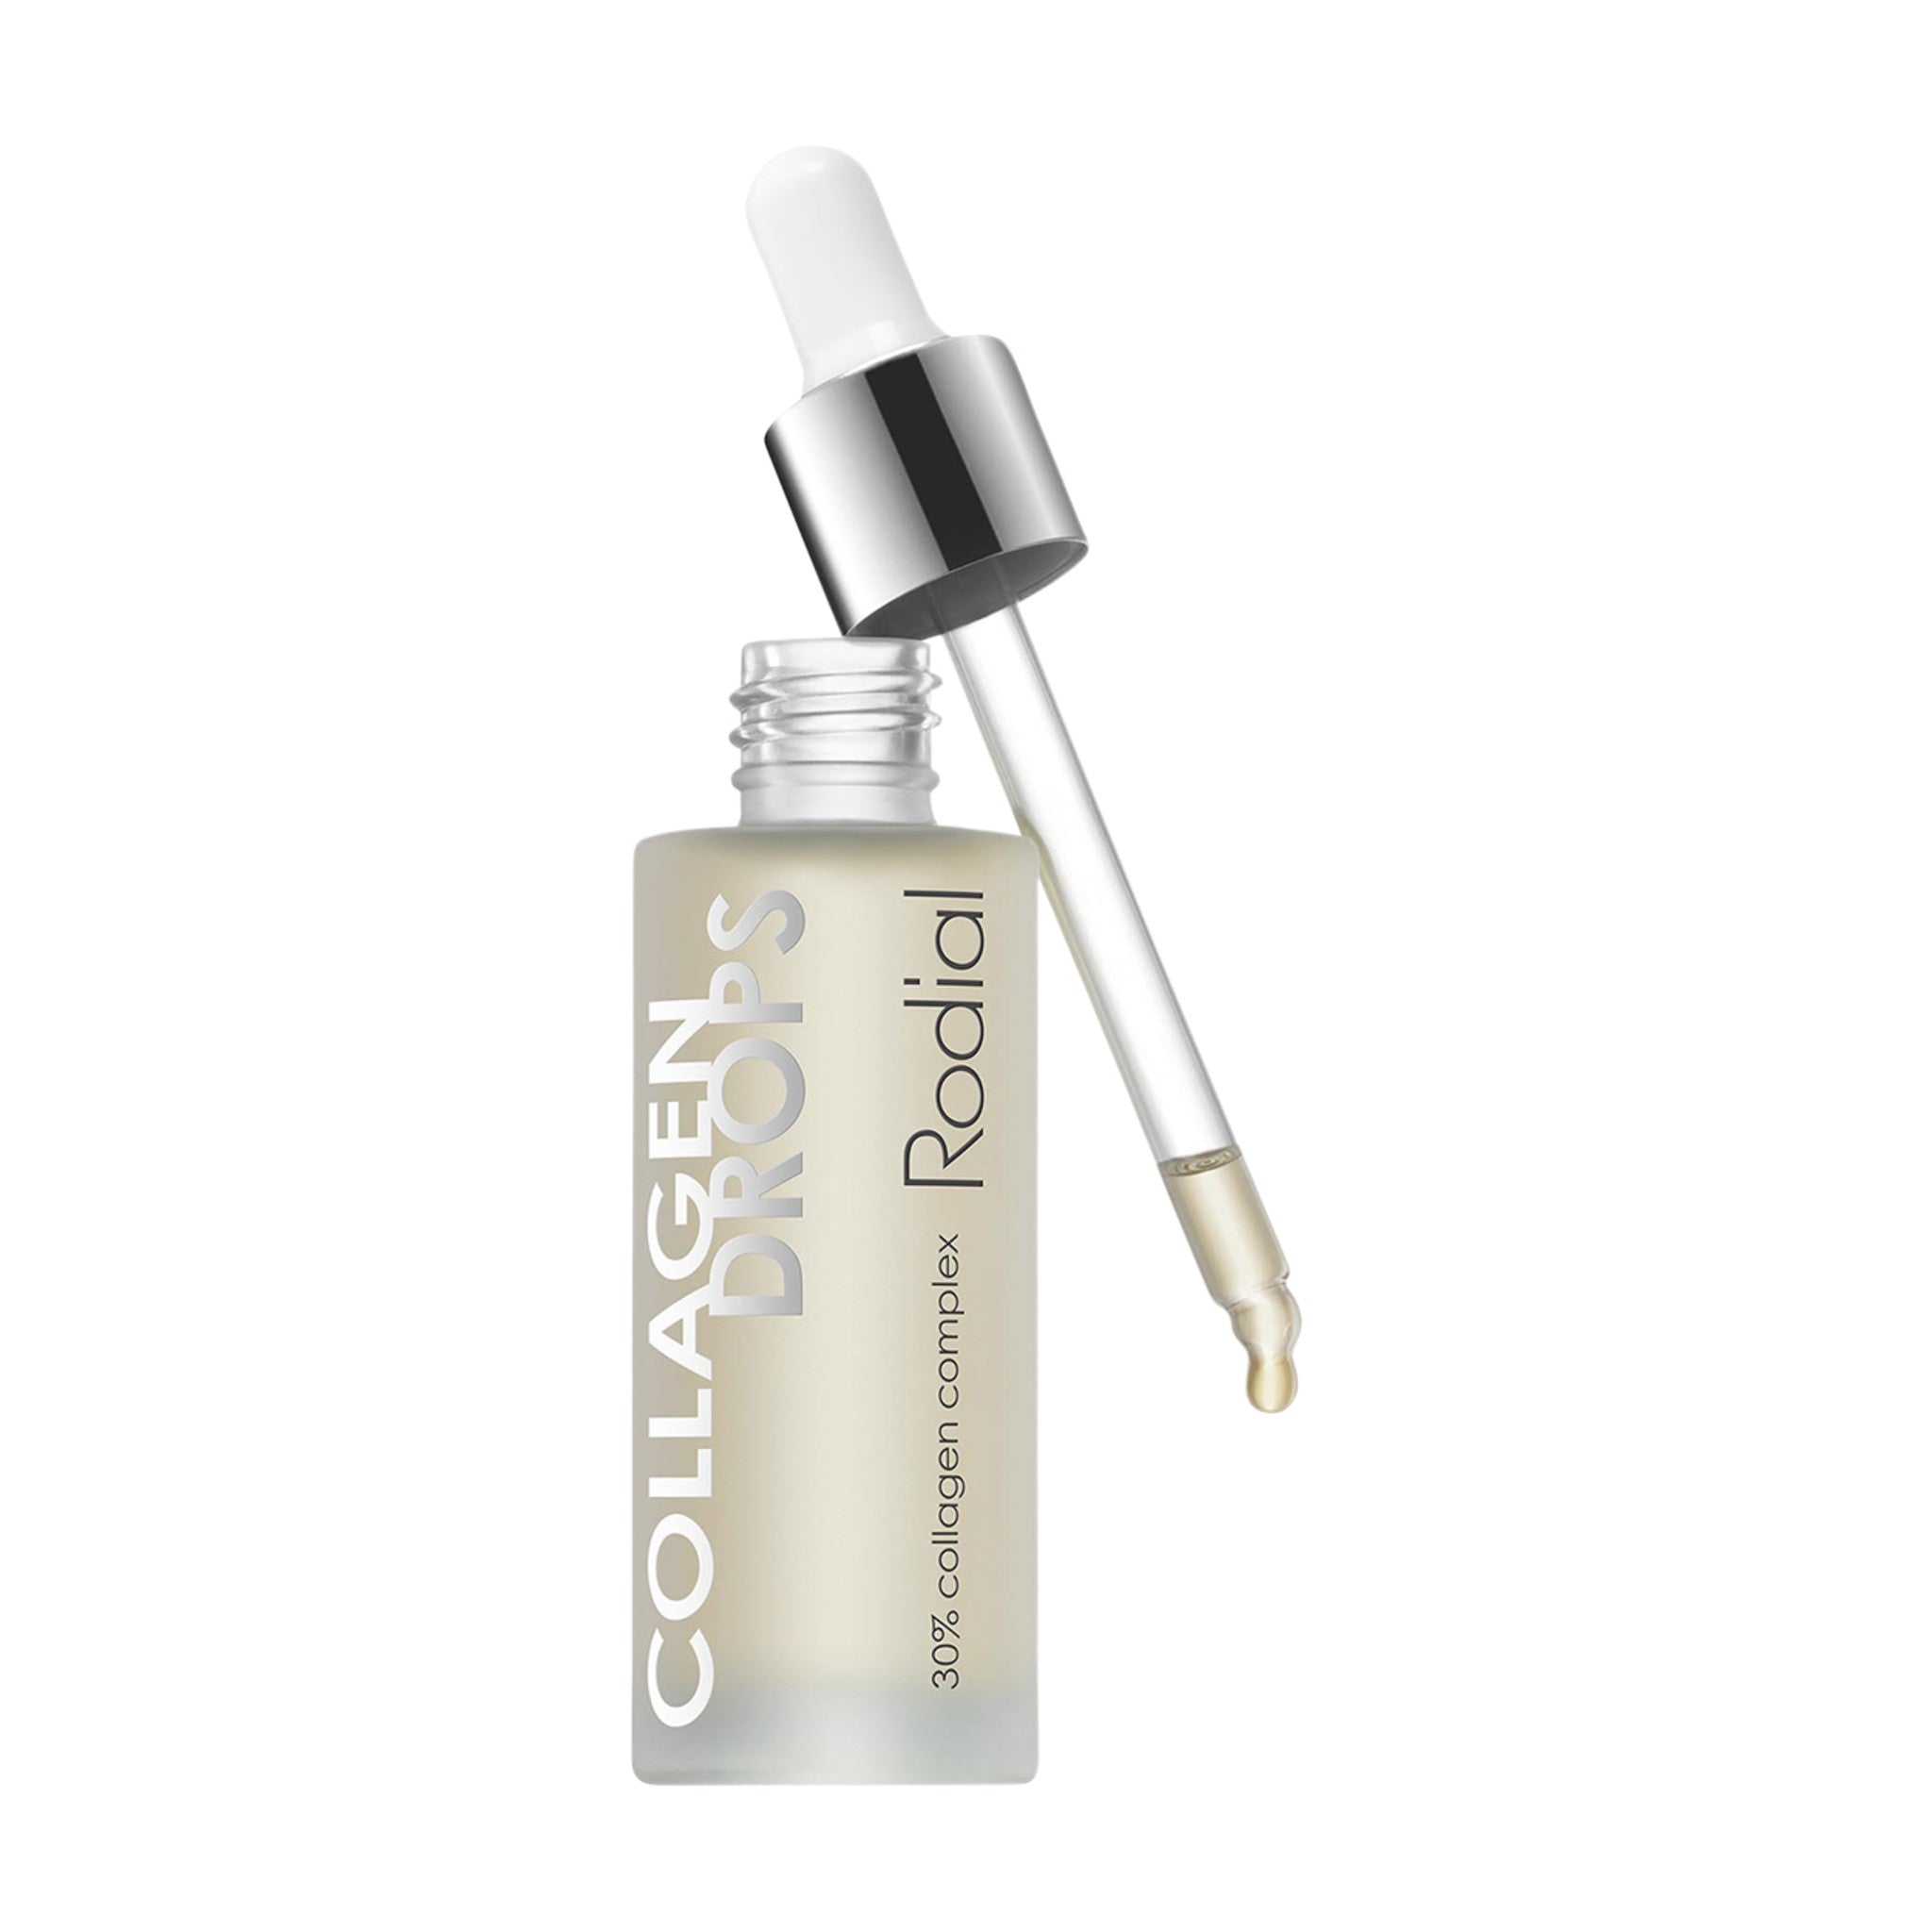 Collagen 30% Booster Drops main image.